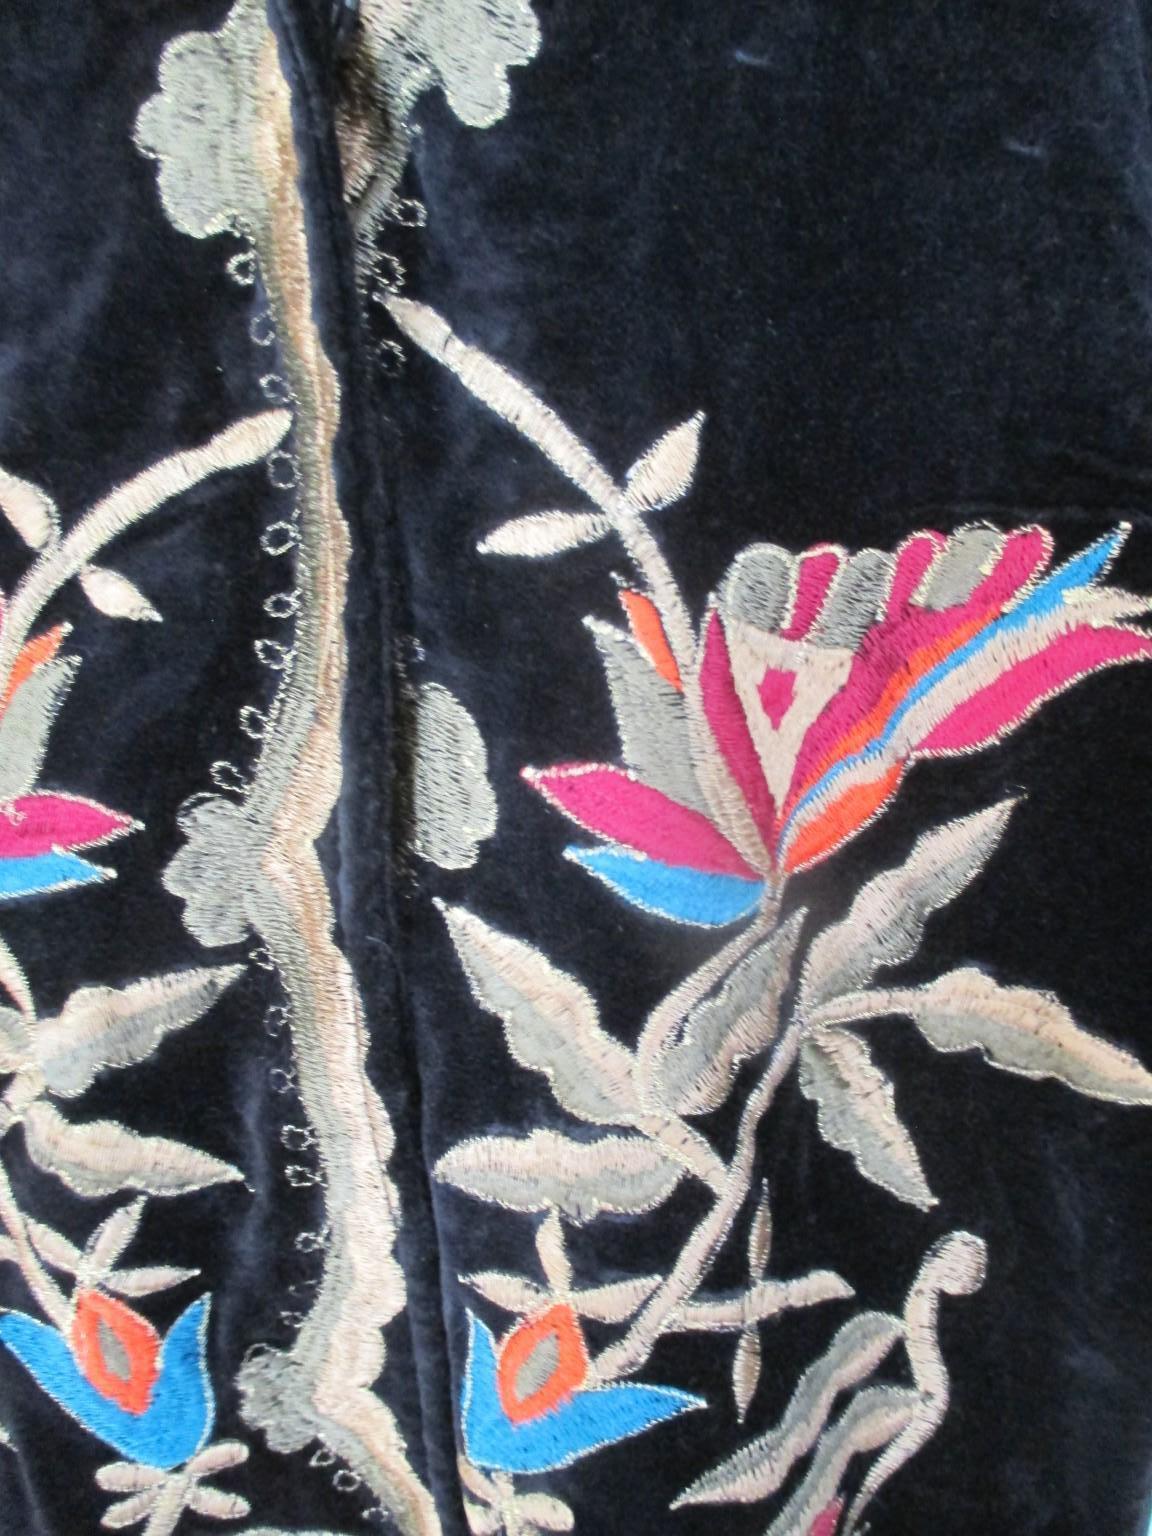 Black Velvet Gold Embroidered  Flowers Coat  In Good Condition For Sale In Amsterdam, NL